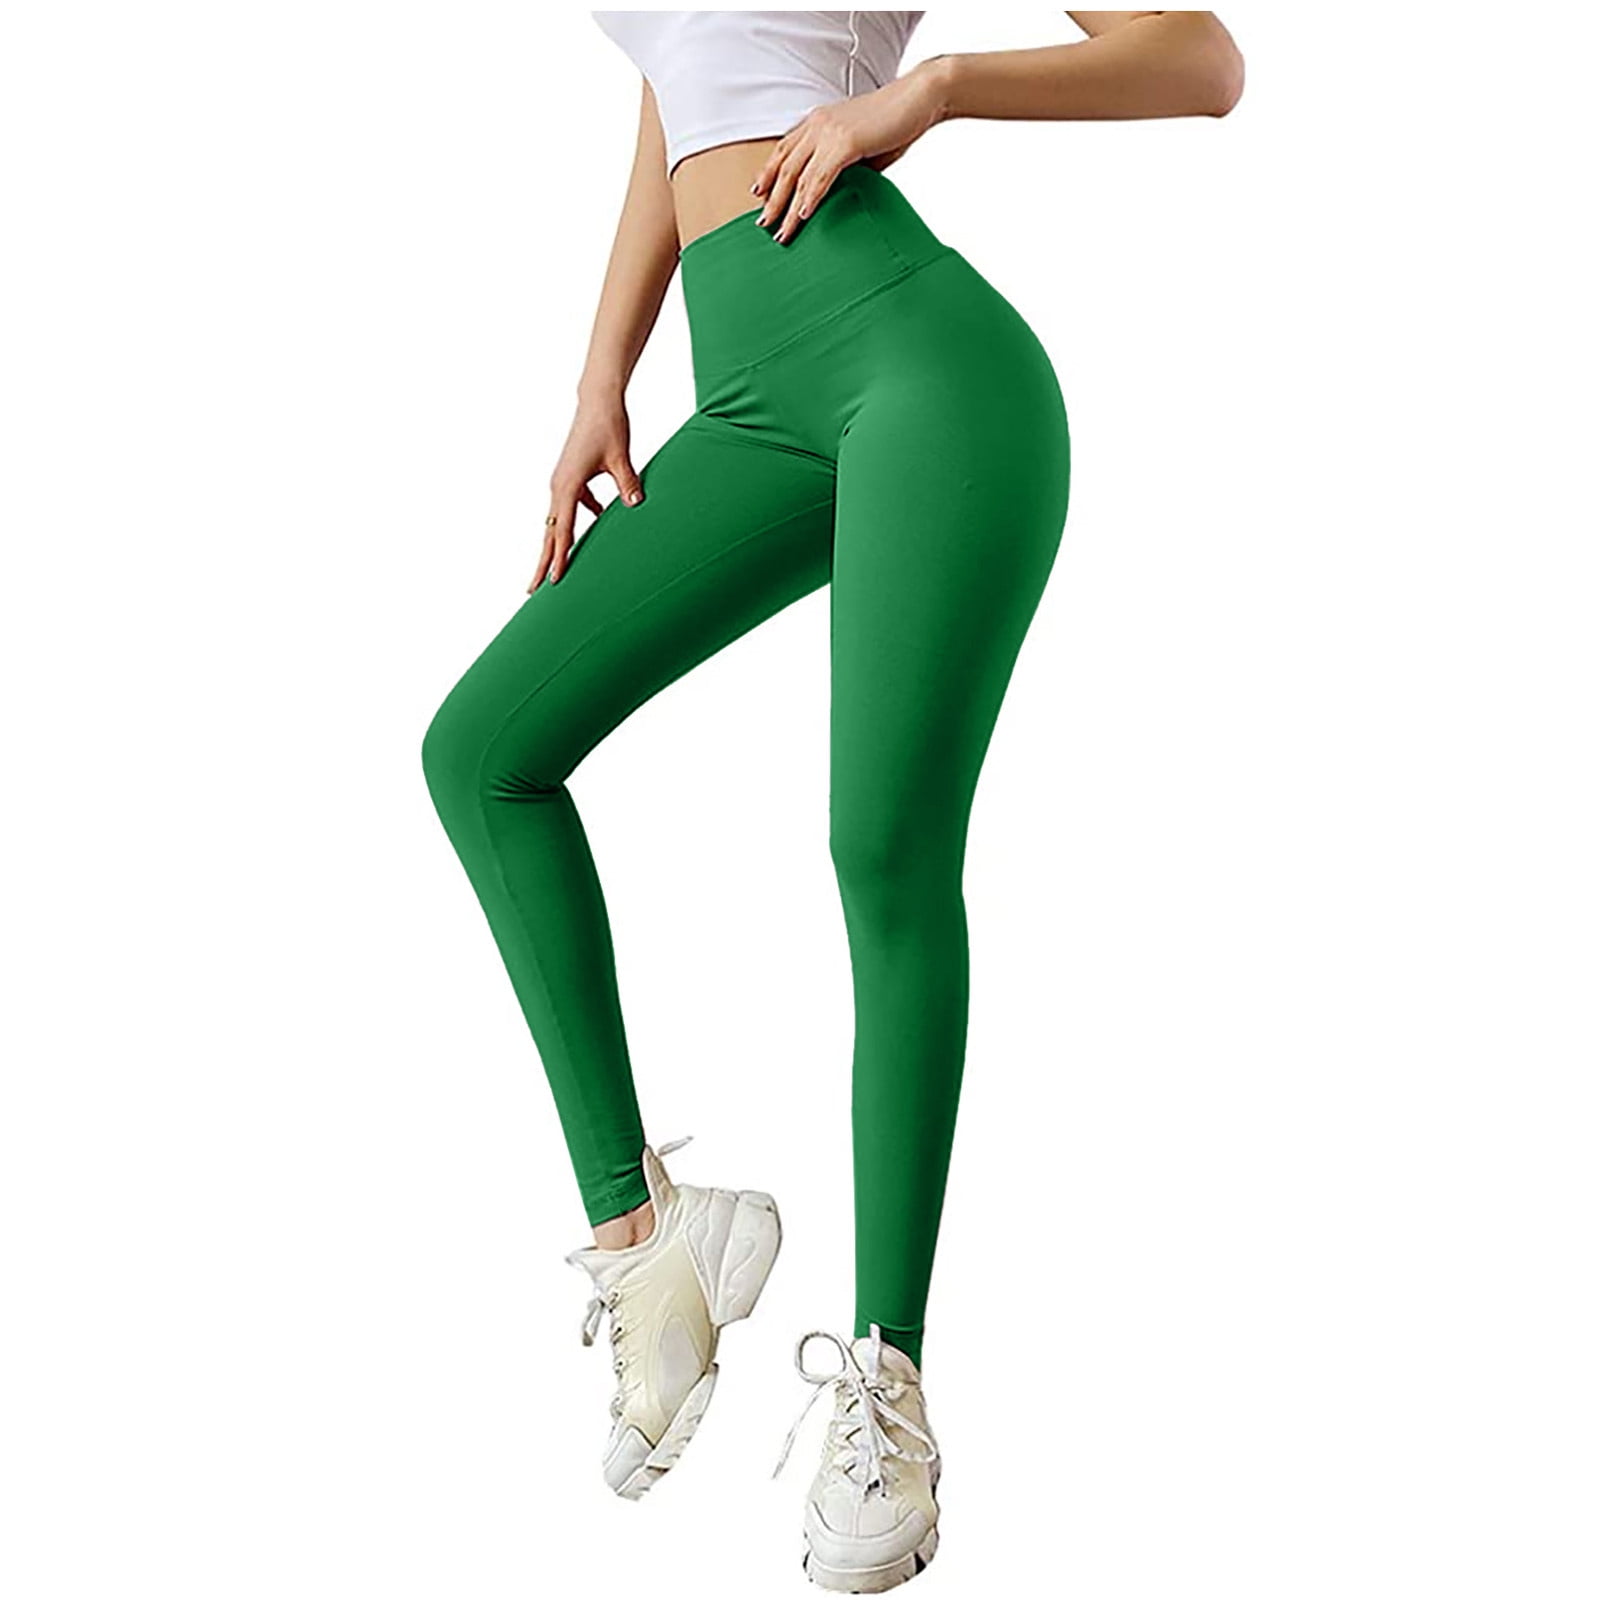 Outfmvch Yoga Pants Women Yoga Pants Polyester,Spandex Relaxed